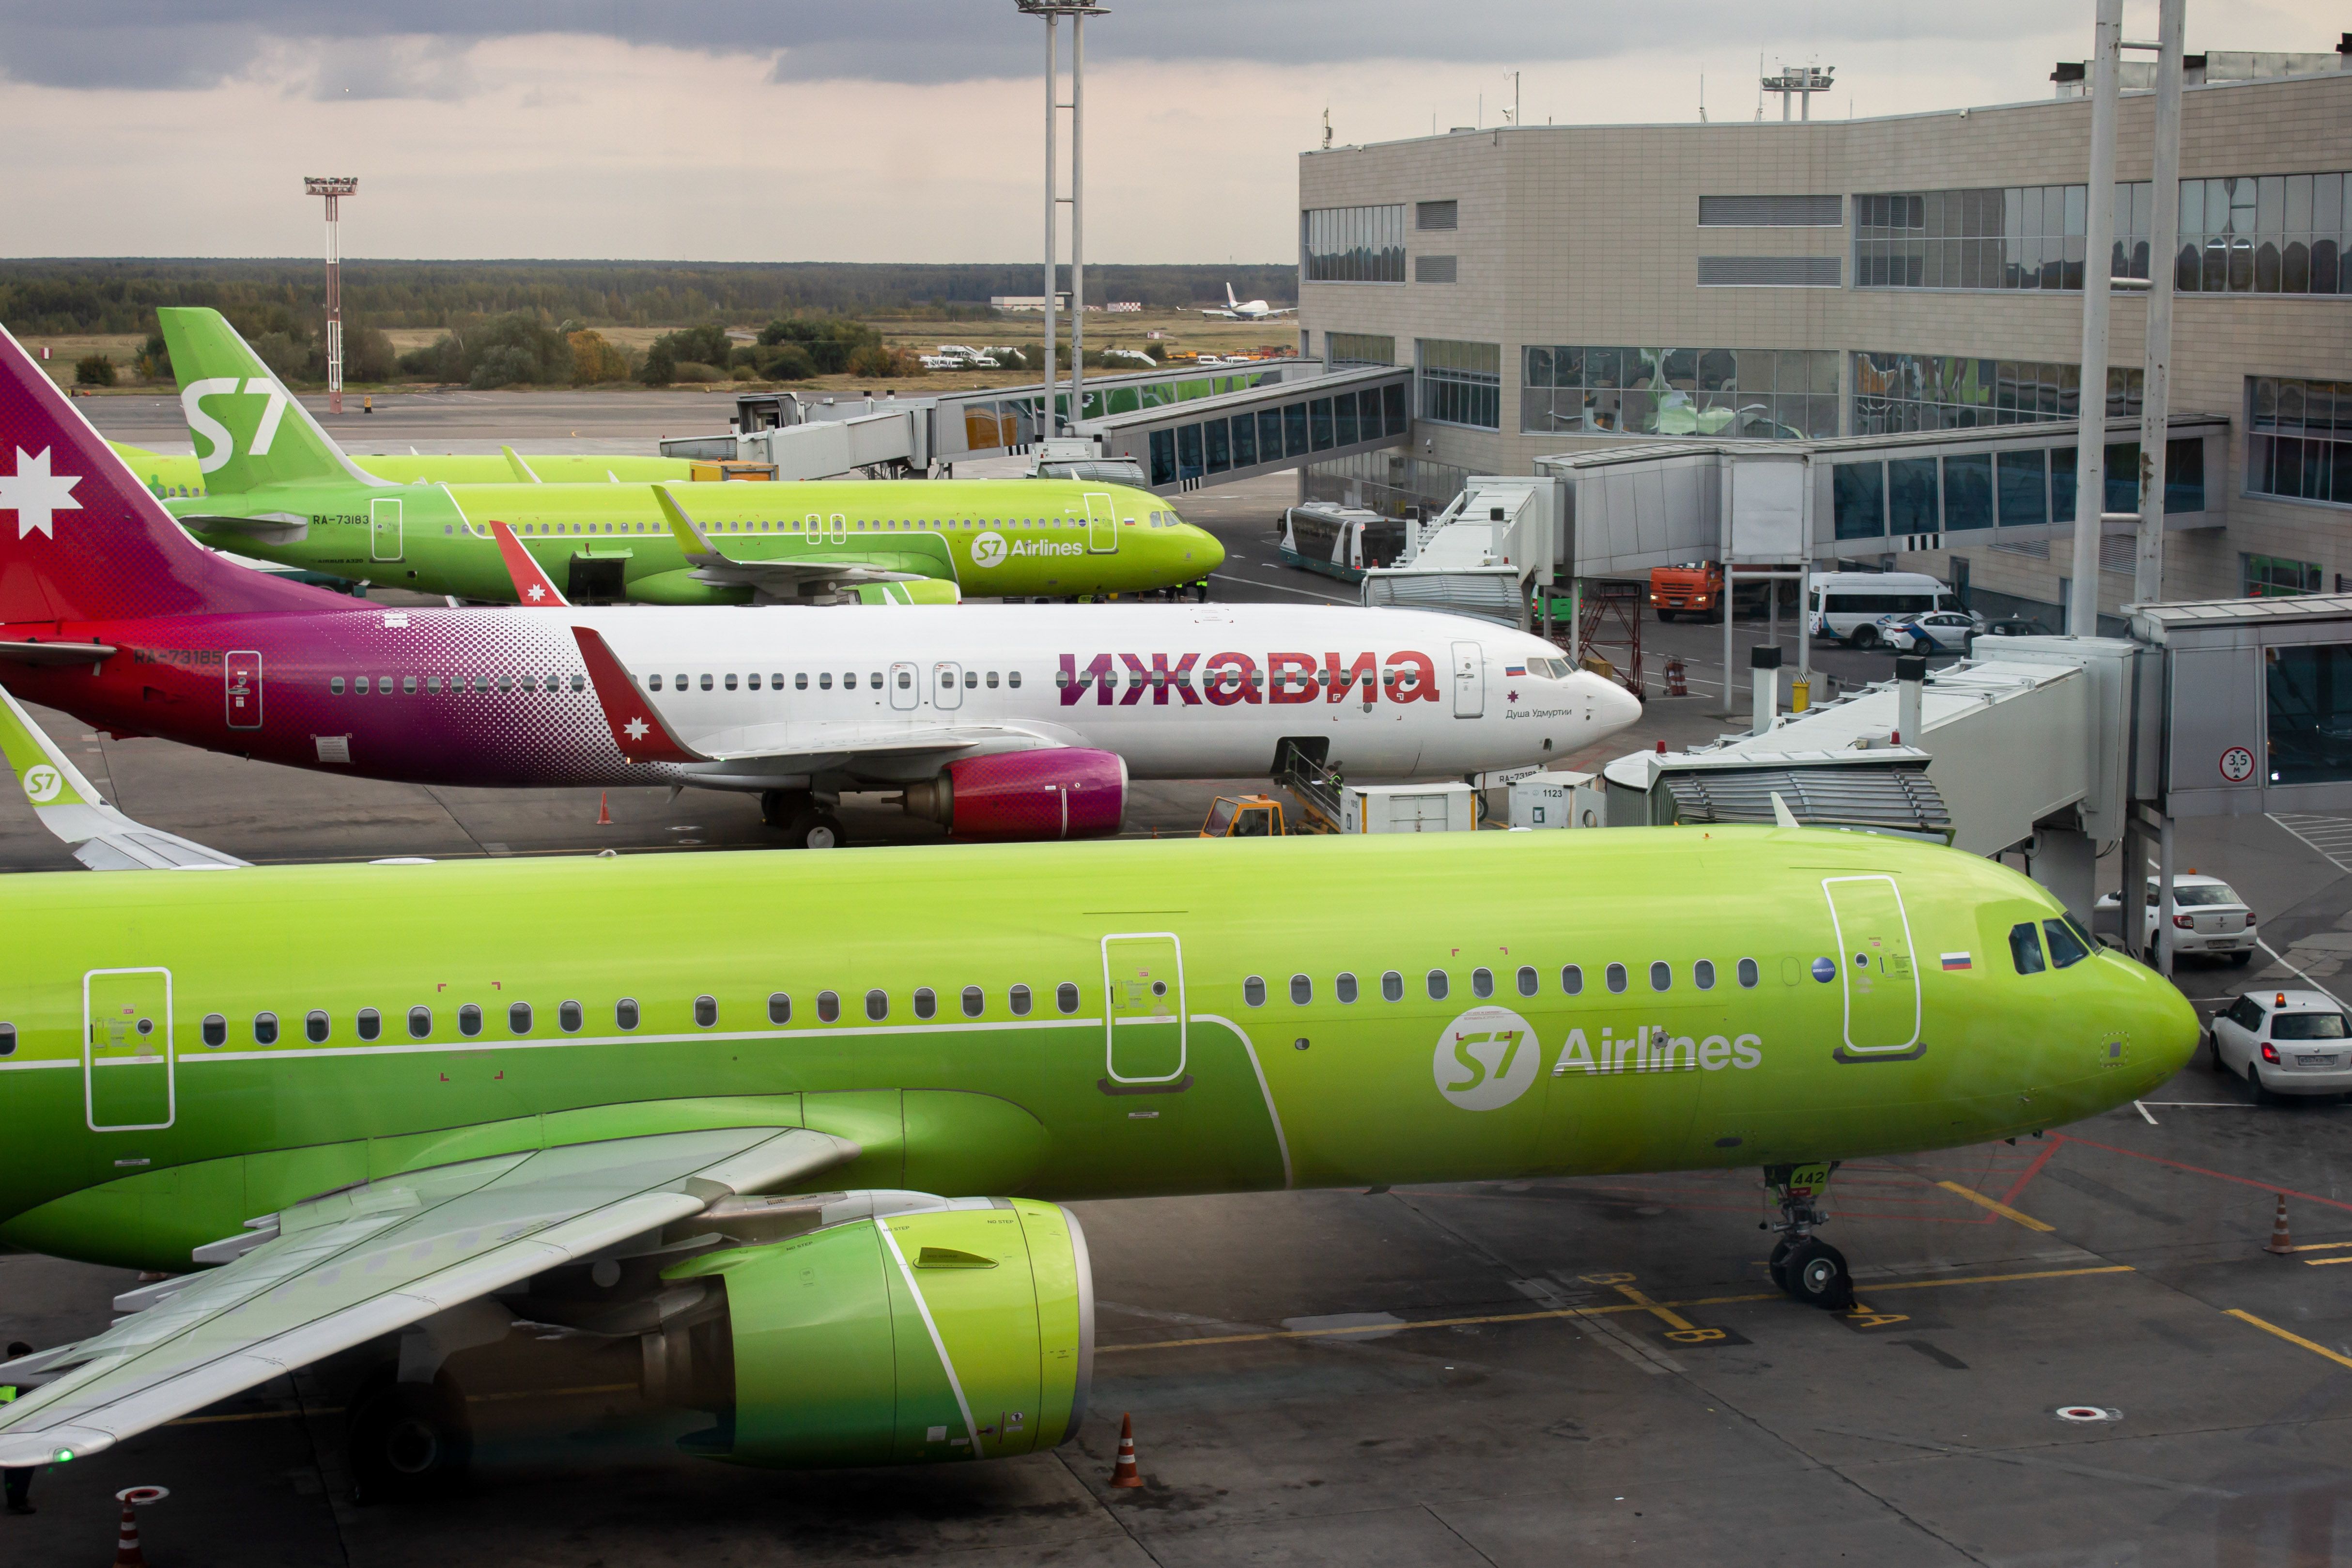 Aircraft from S7 Airlines and Izhavia Airlines are seen at the Domodedovo airport in Moscow.